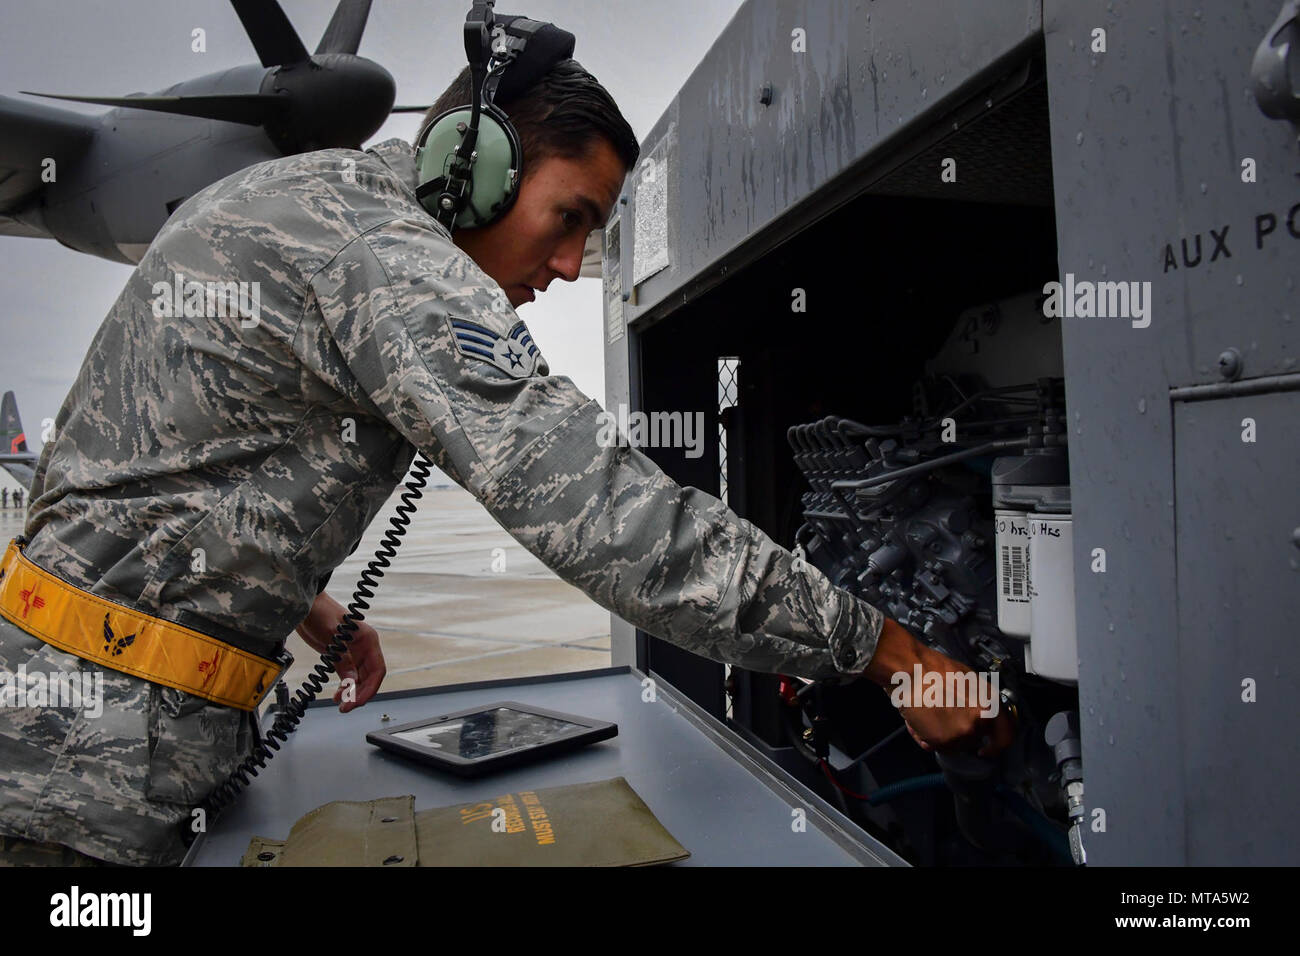 U.S. Air National Guard member Senior Airman Santos Casaus from the 146th Maintenance Squadron checks the oil levels on a generator that will power a C-130J aircraft at Gowen Field, Idaho, April 20, 2017. Casaus and a maintenance crew from the 146th Airlift Wing will be providing maintenance service on two C-130J aircraft equipped with the Modular Airborne Fire Fighting System (MAFFS) from the Channel Islands Air National Guard Station during the week-long multi-agency wildfire training with the U.S. Forest Service, CAL FIRE, and multiple Air National Guard and U.S. Air Force Reserve wings. Stock Photo